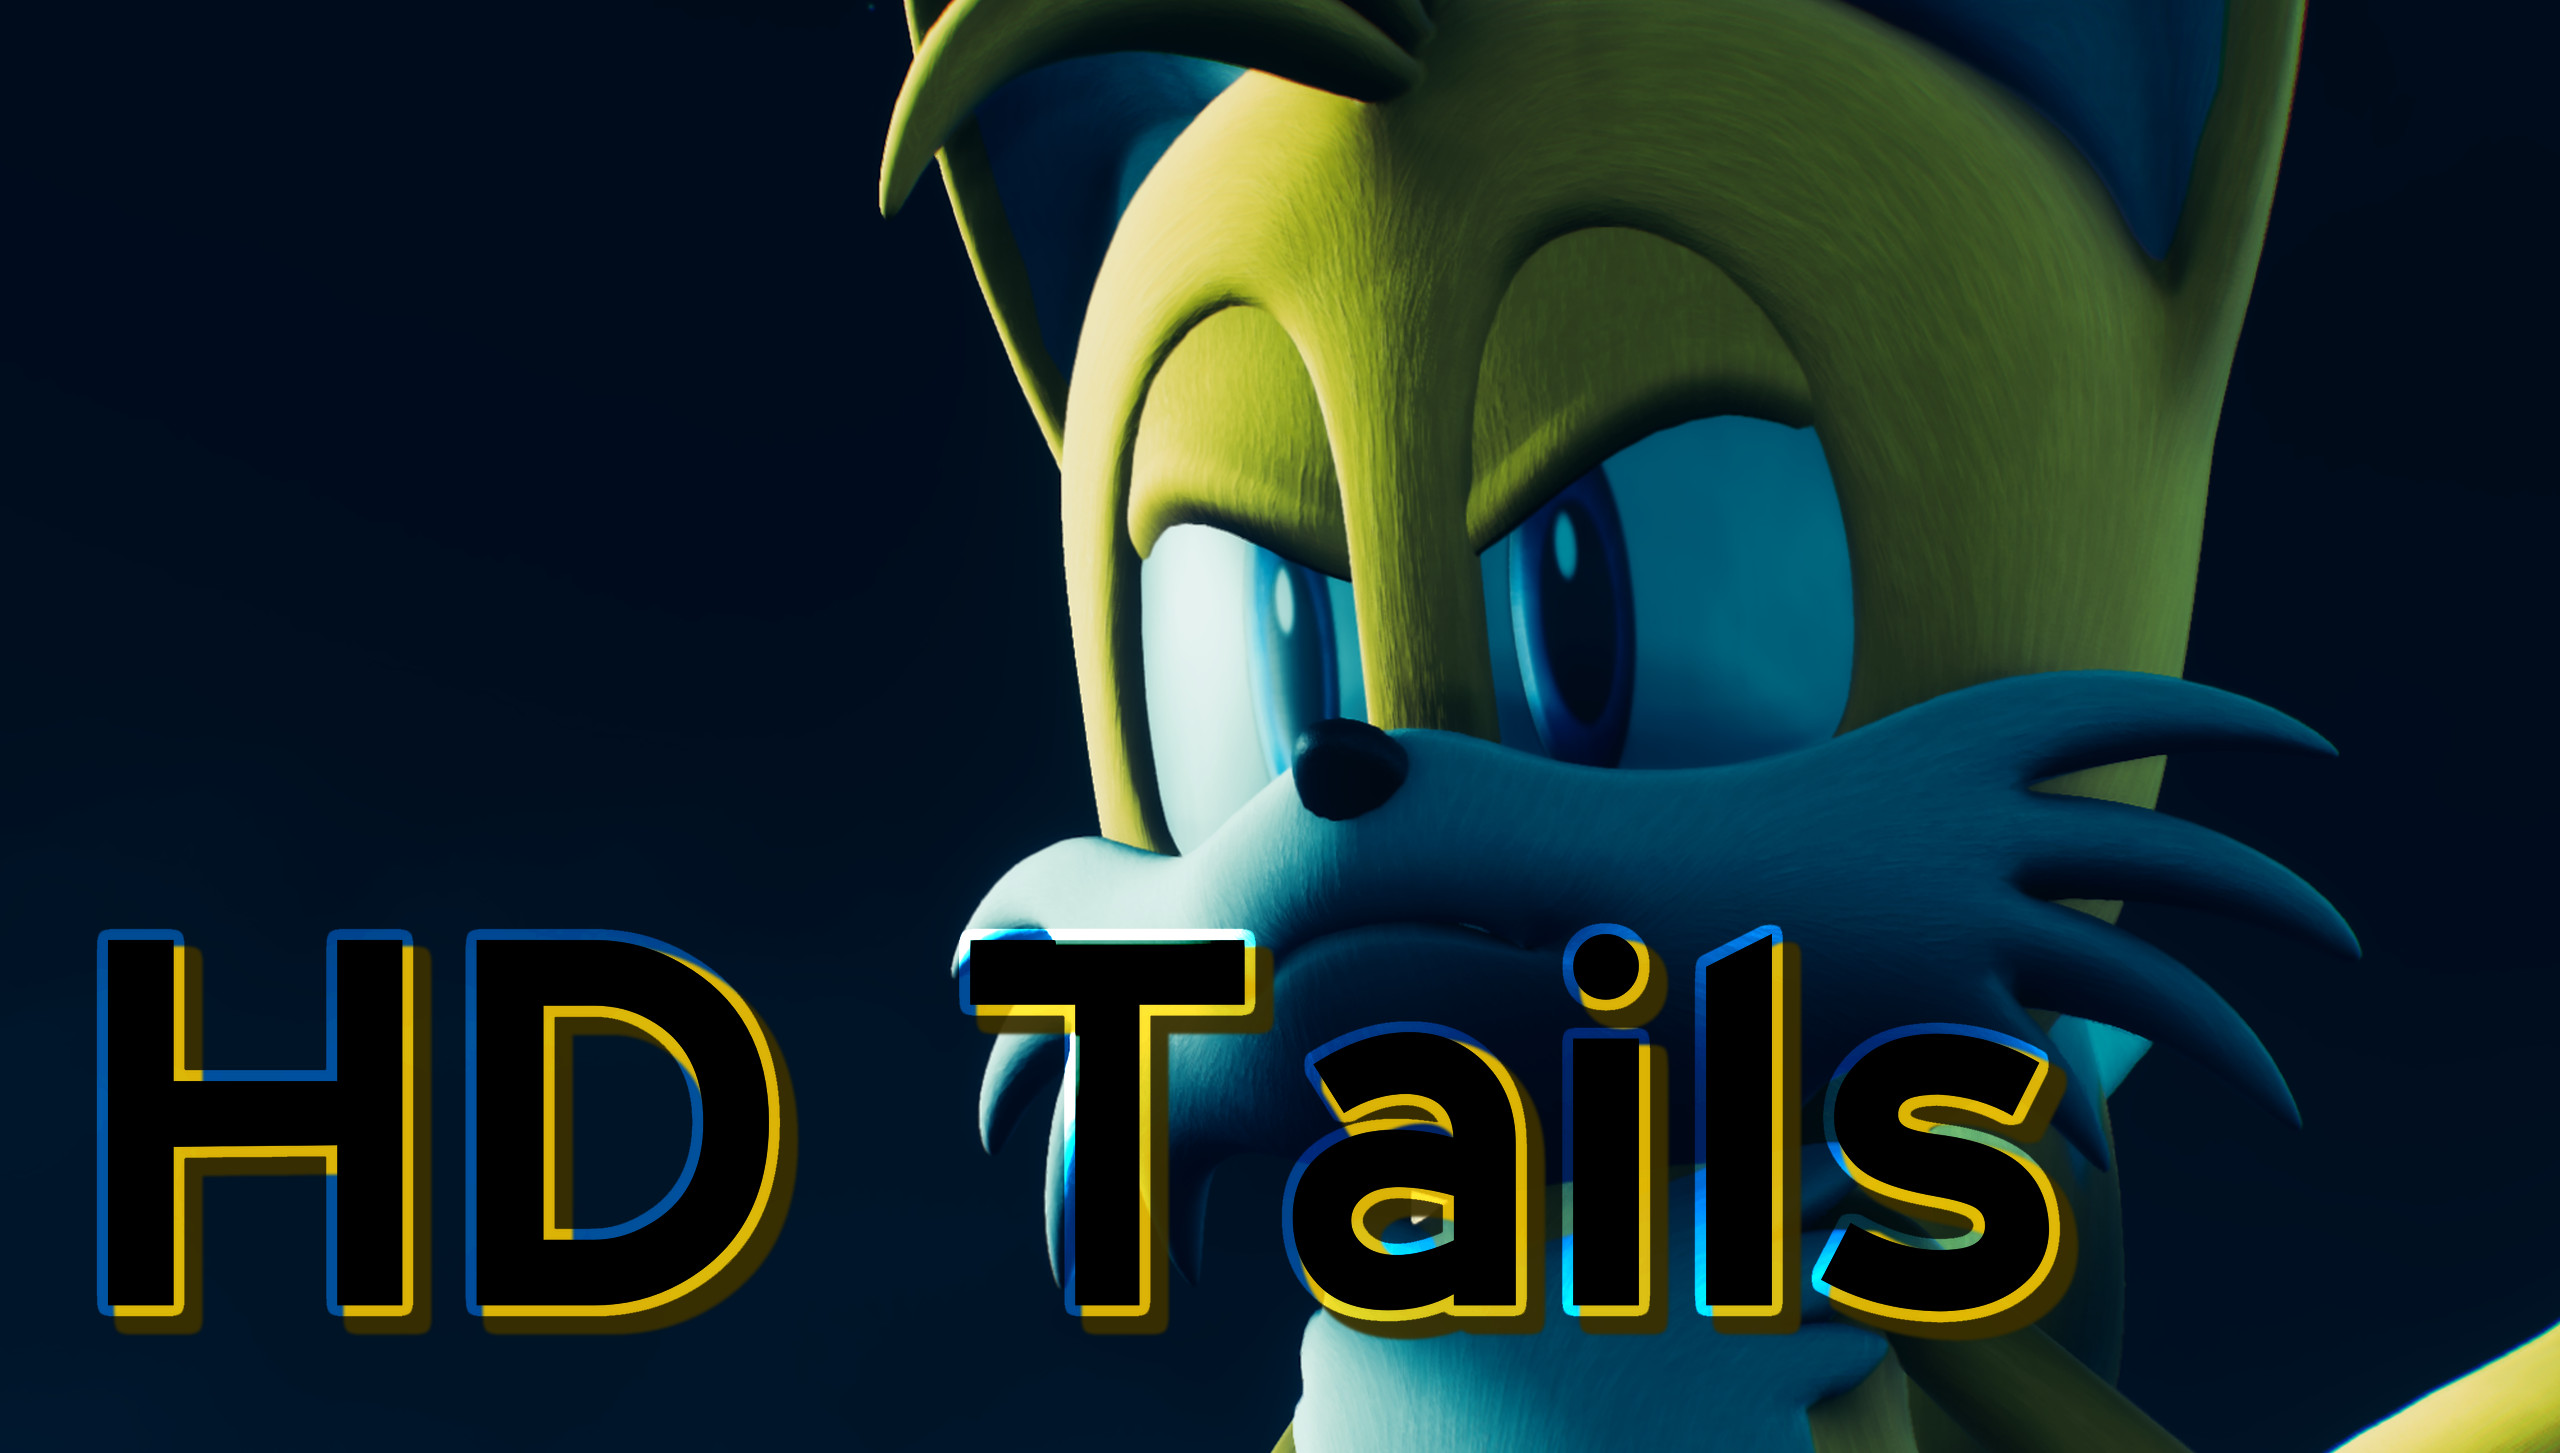 spoon's HD Tails [Sonic Frontiers] [Mods]